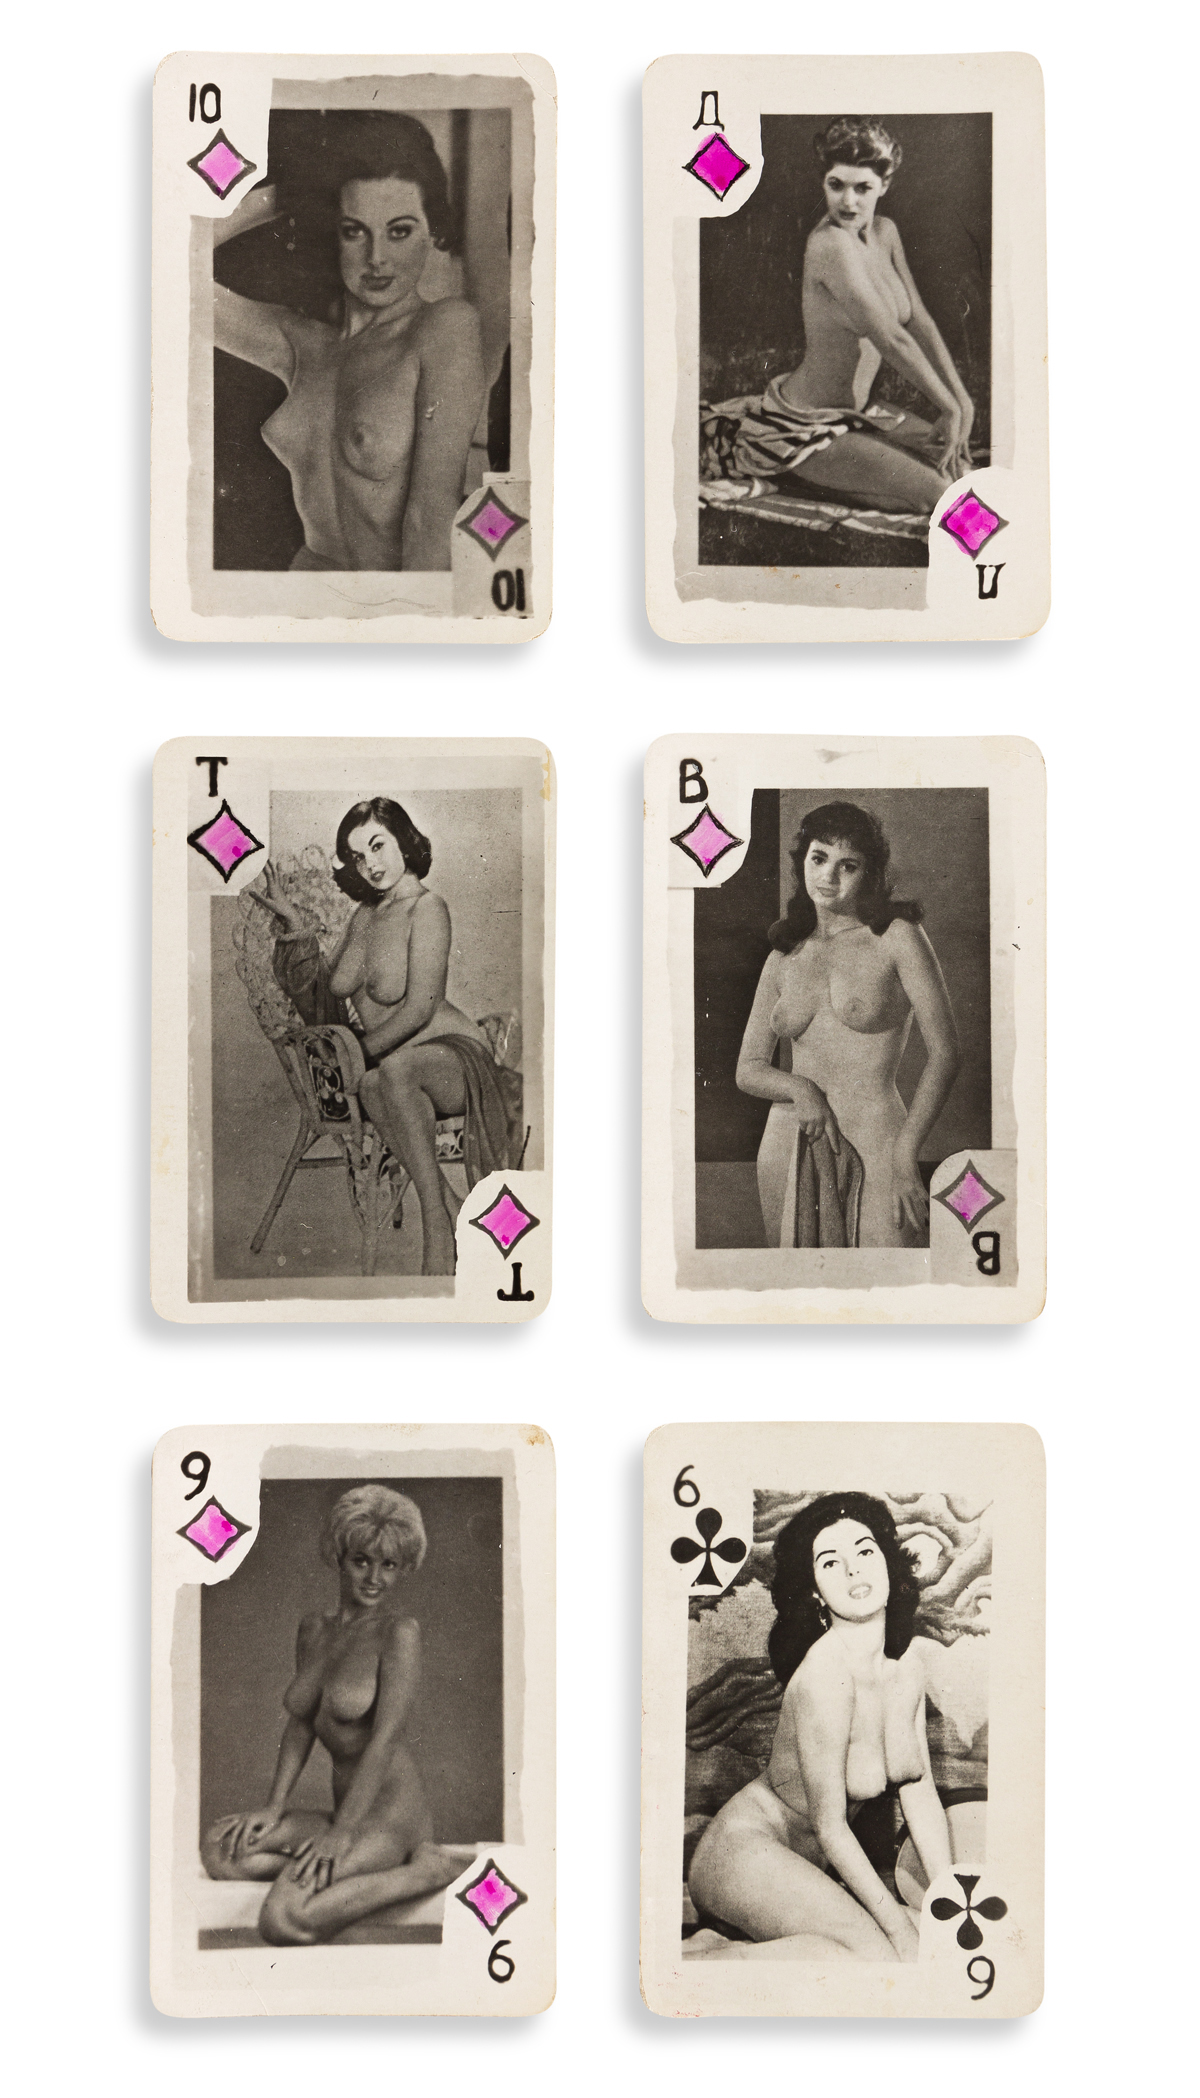 diane marchand recommends naked women playing cards pic